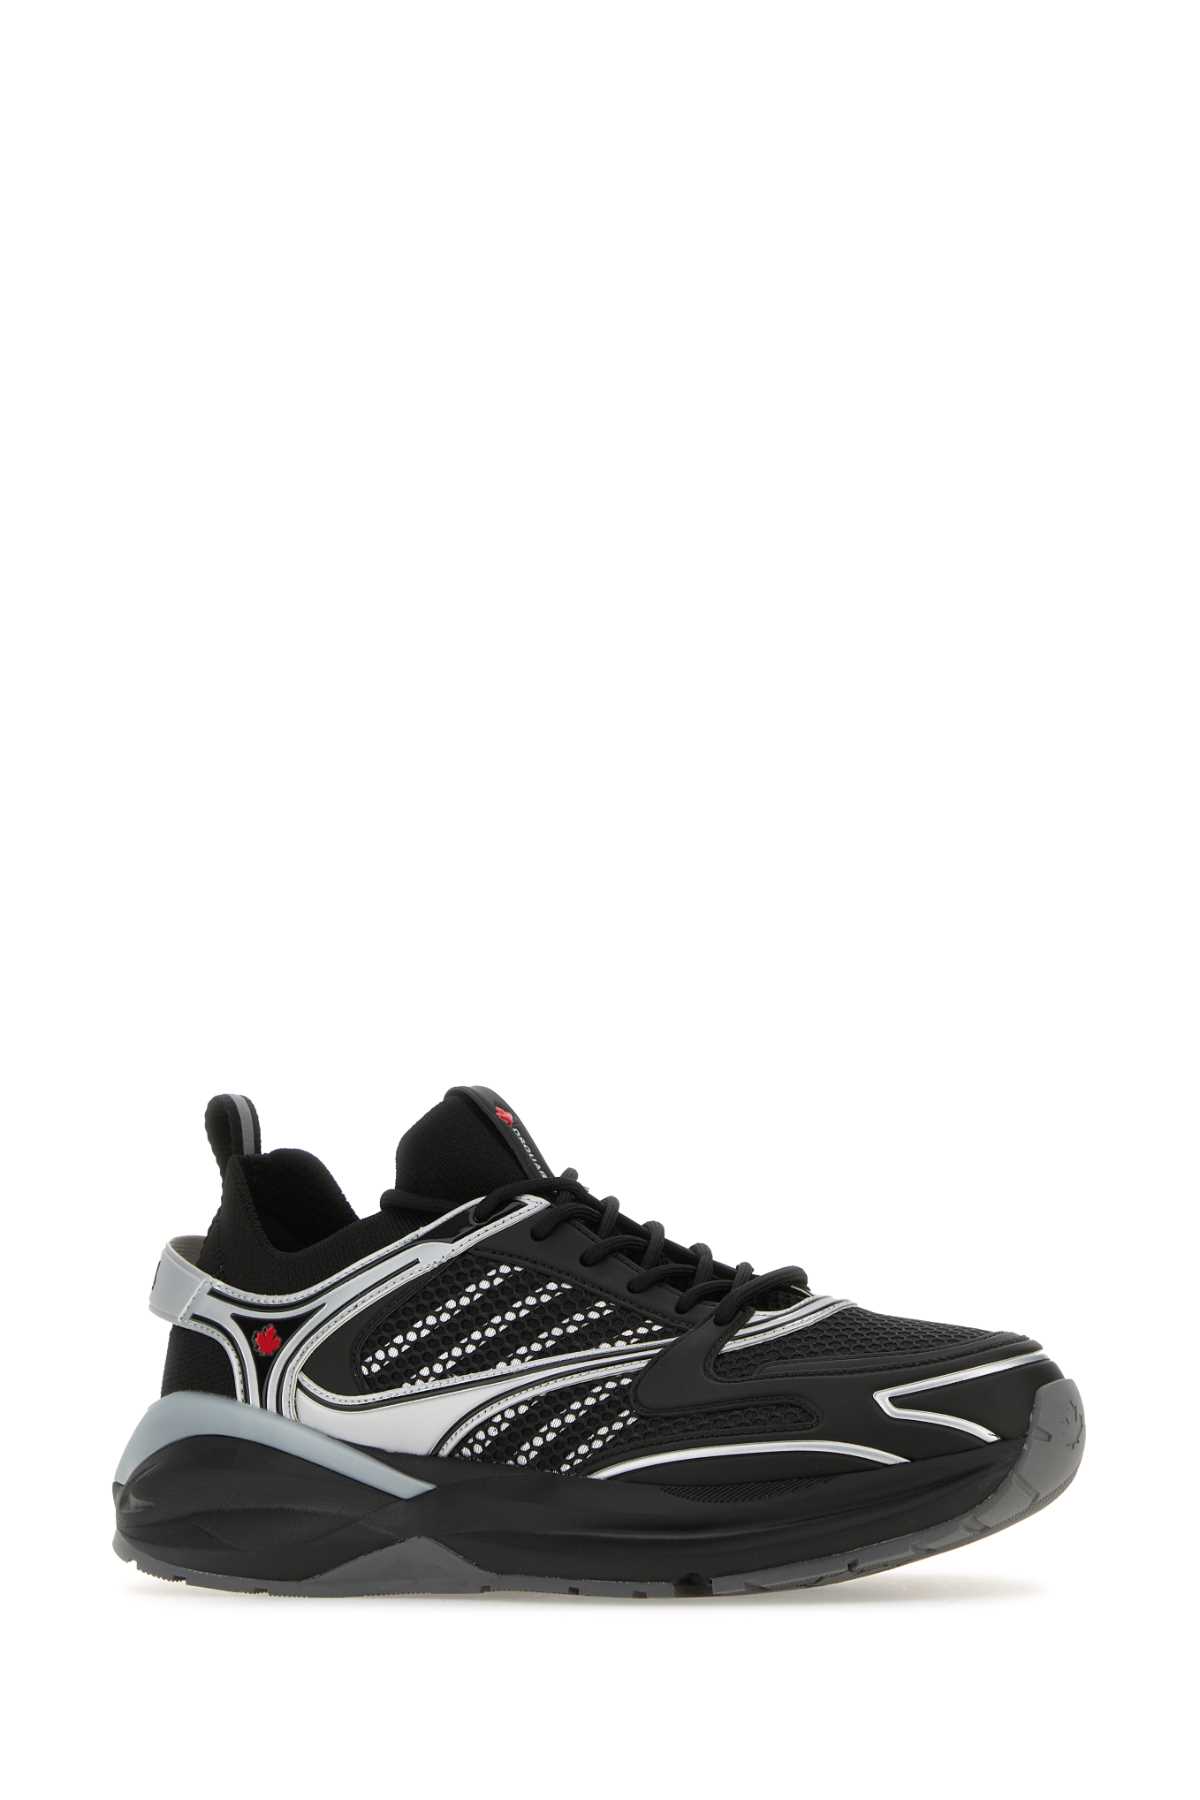 Dsquared2 Multicolor Fabric, Mesh And Rubber Dash Sneakers In Black